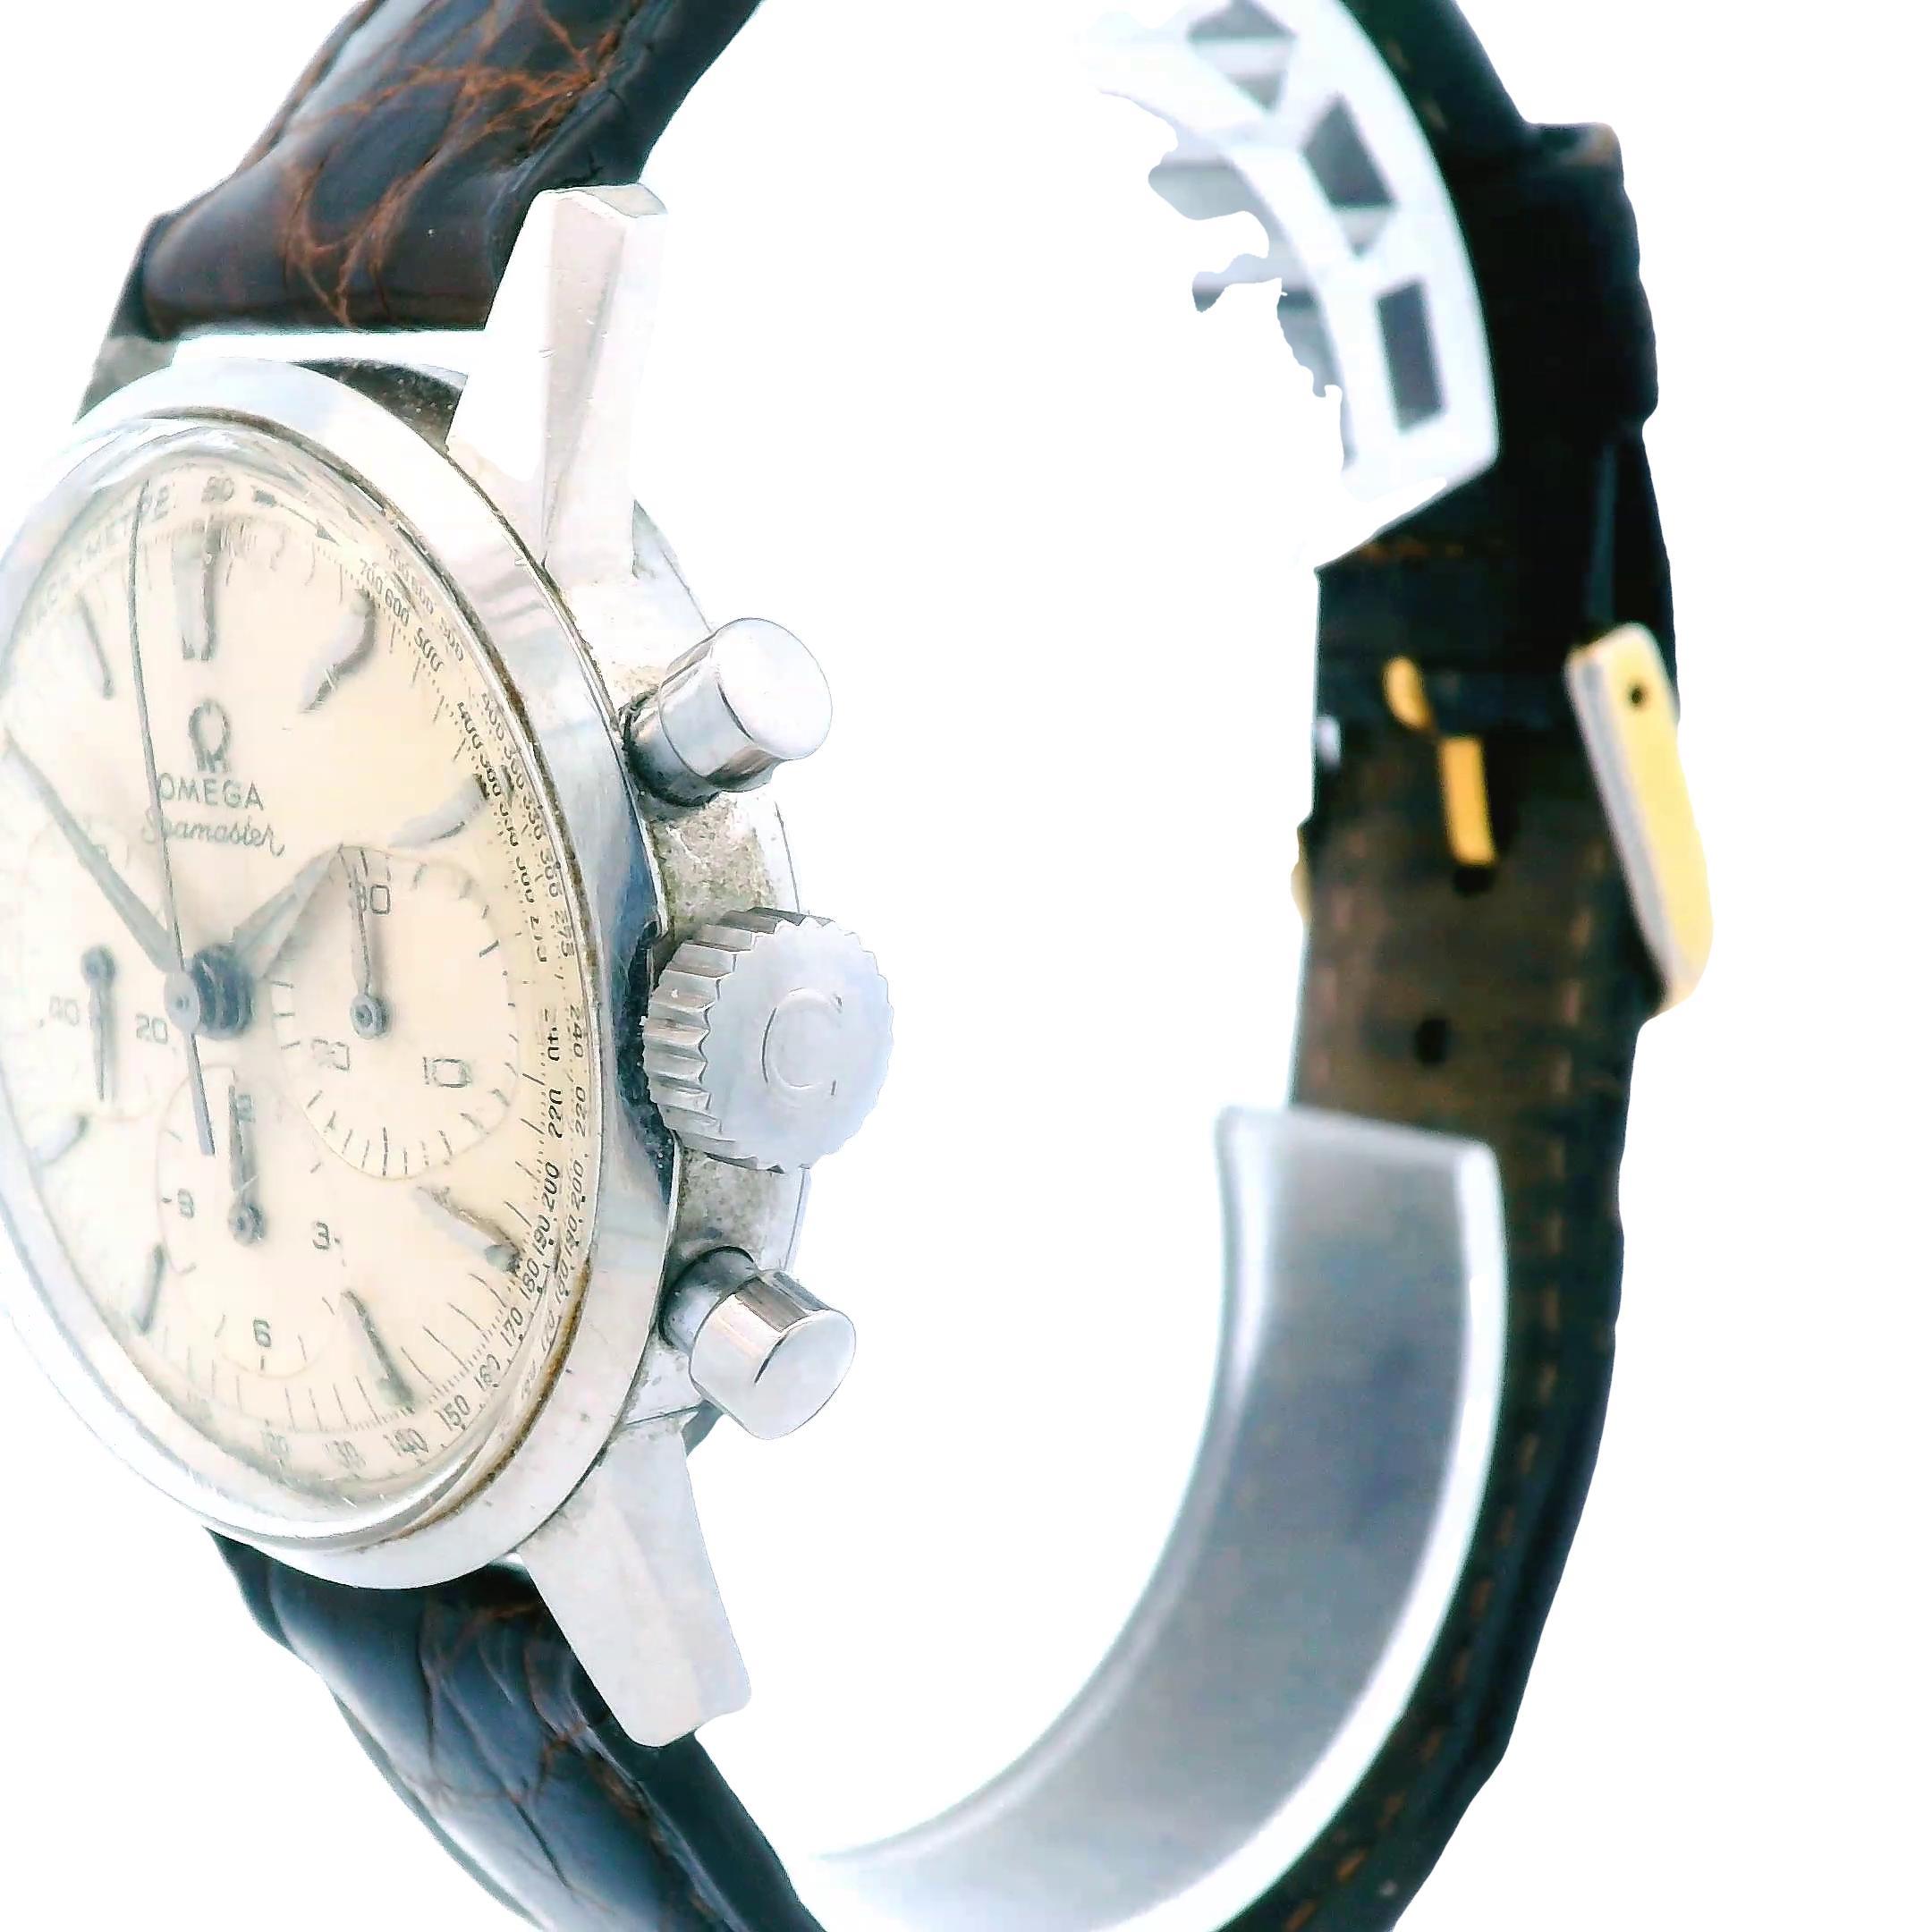 1960s Omega Seamaster Chronograph Watch in Stainless Steel - Running In Good Condition For Sale In Lexington, KY